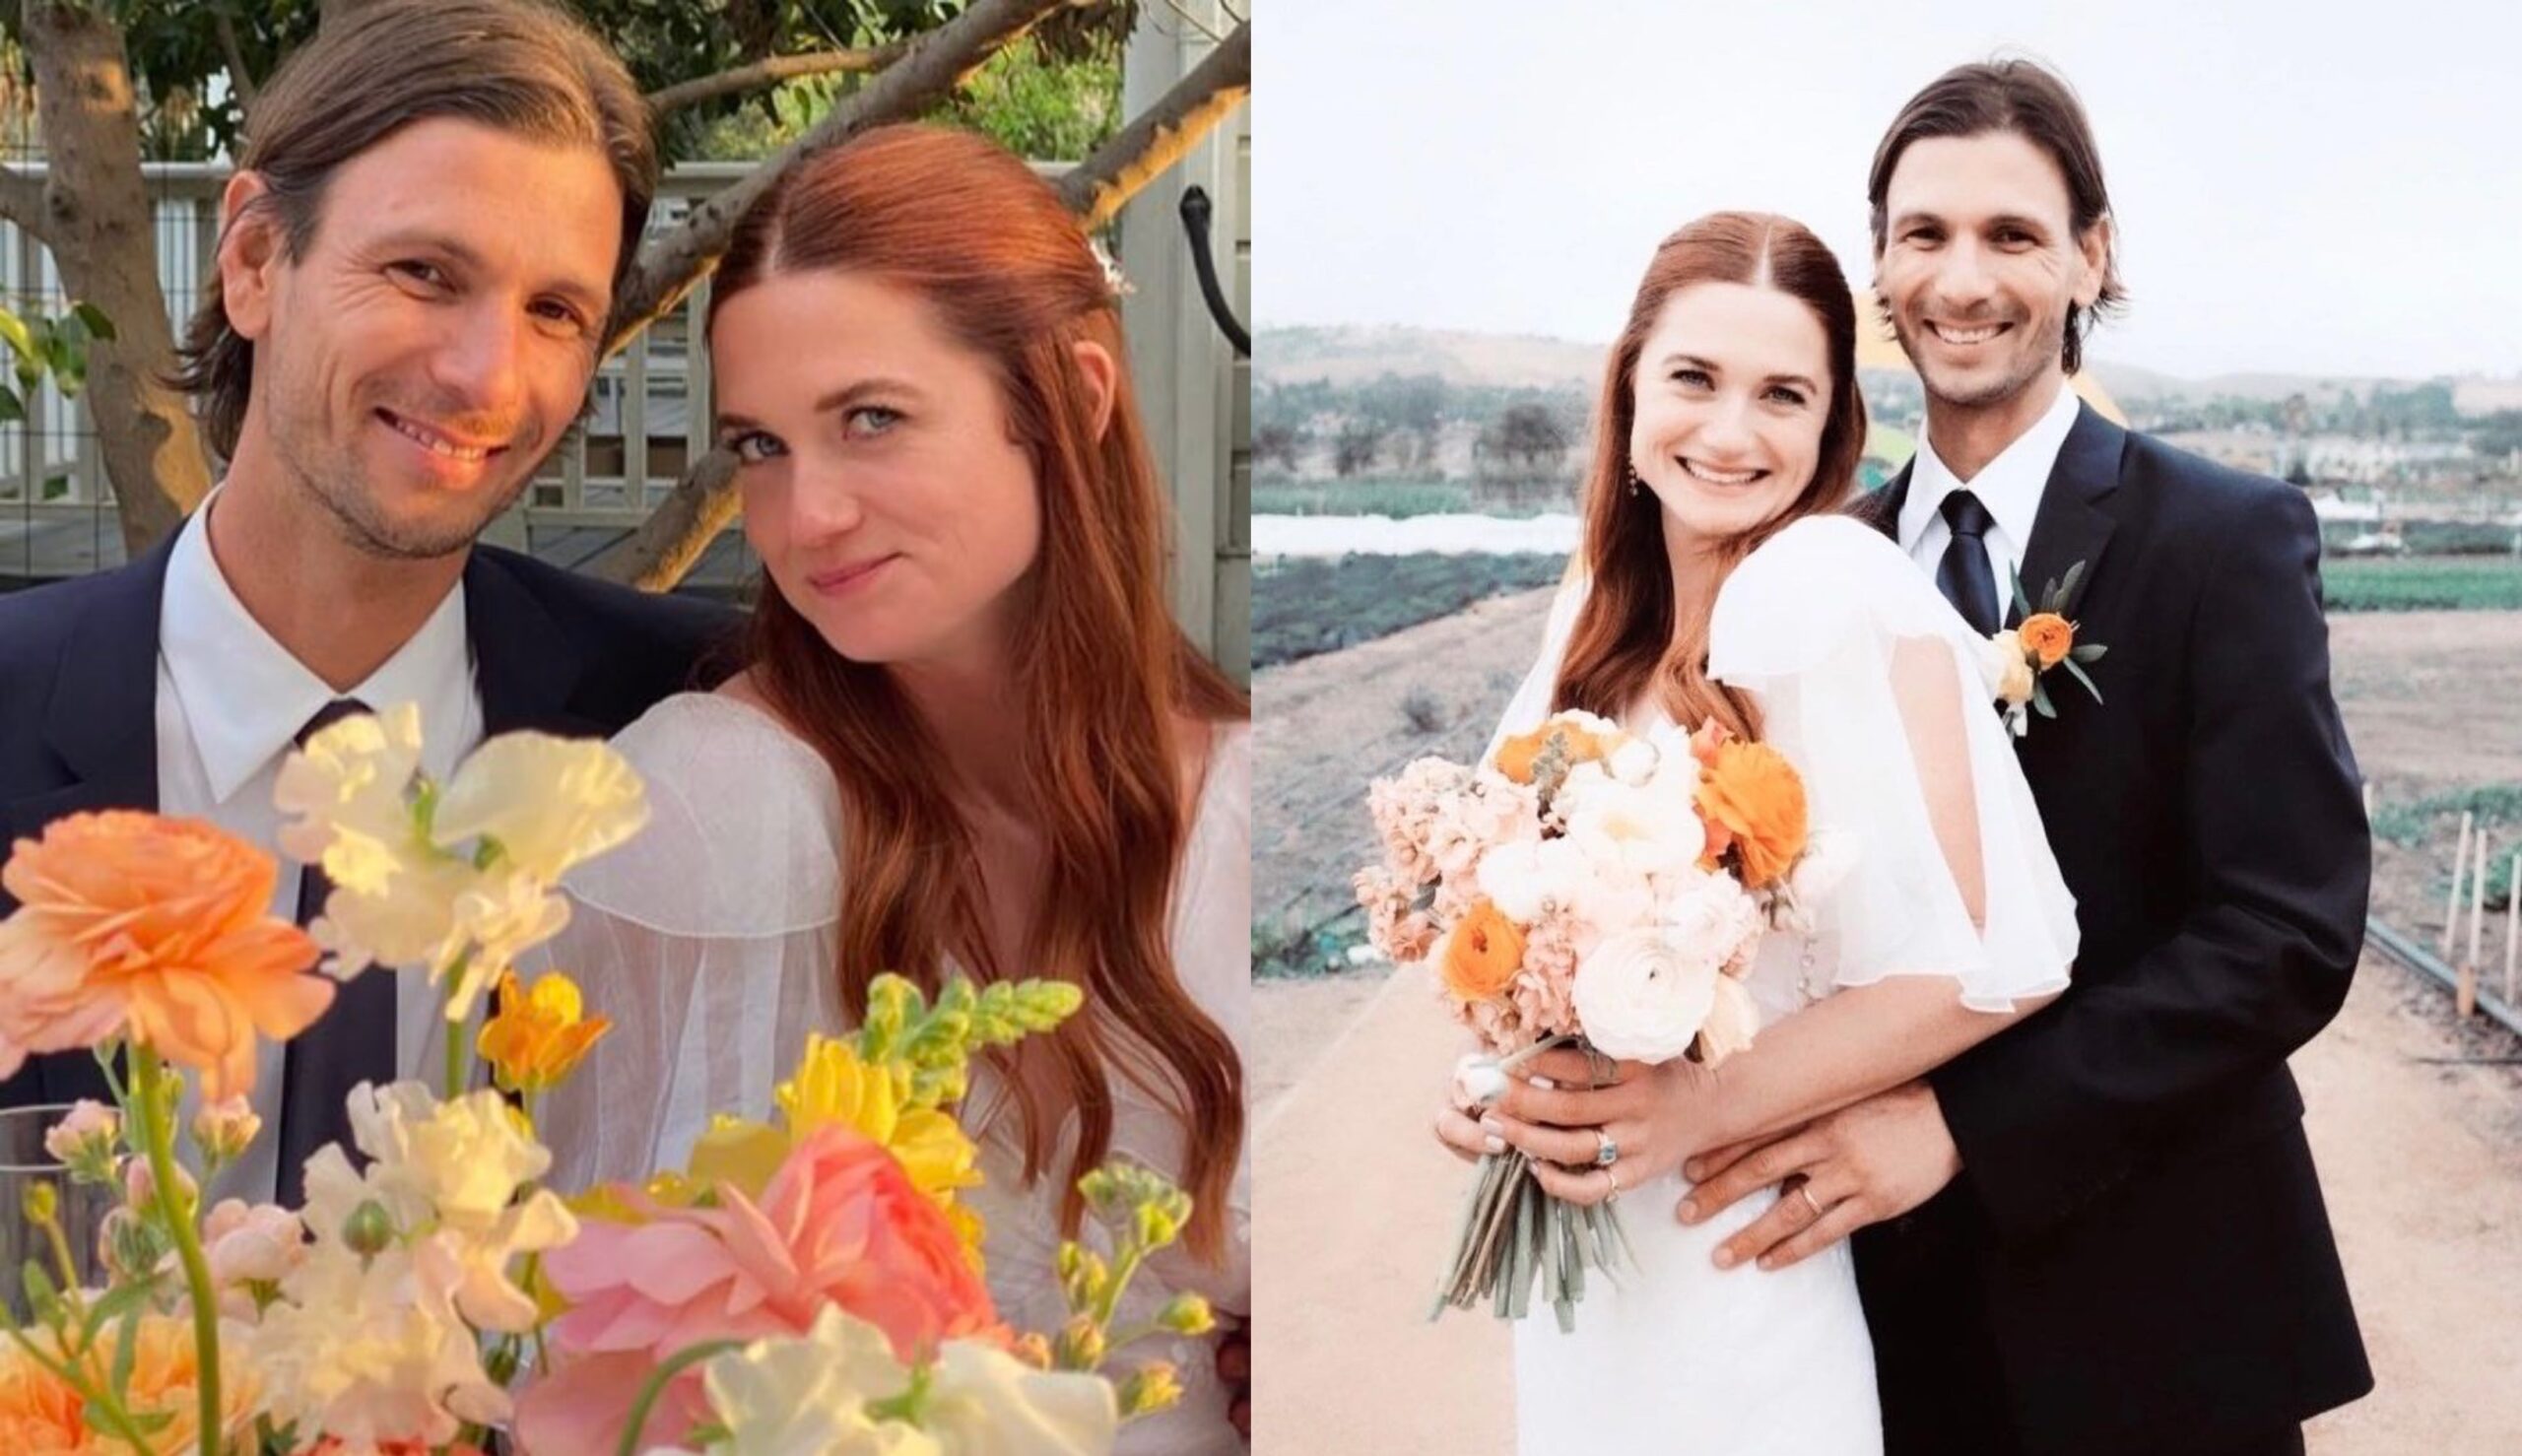 LOOK: ‘Harry Potter’ star Bonnie Wright is married